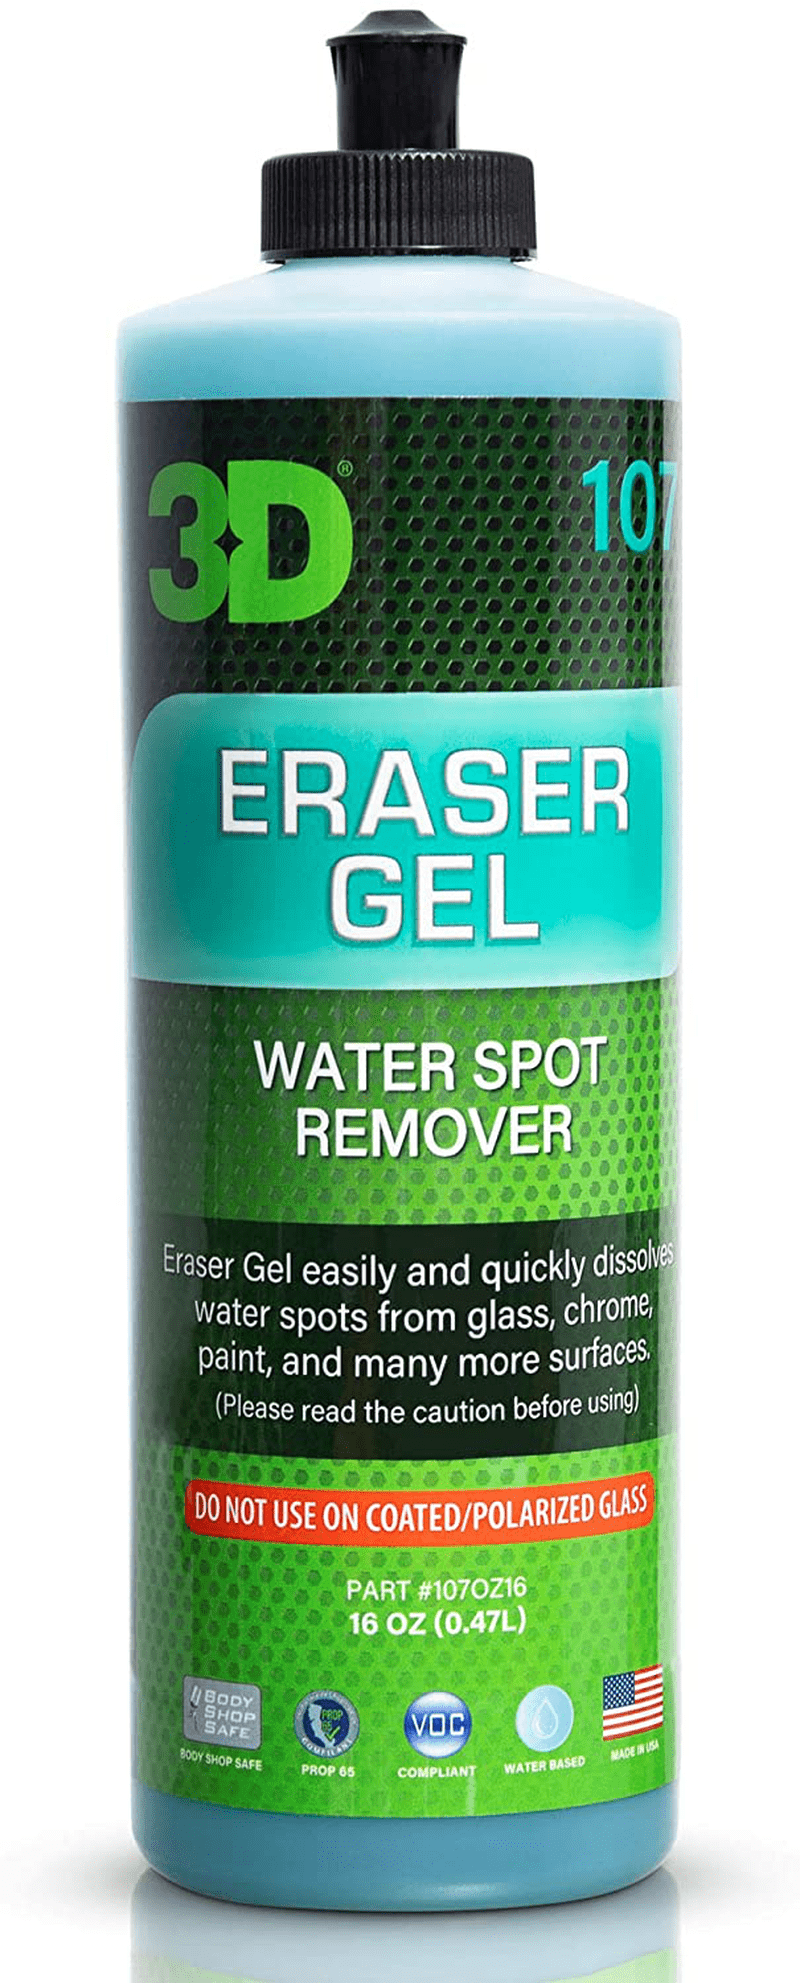 3D Eraser Gel Hard Water Stain Remover - 16 oz - Hard Water Spot Remover for Cars, Glass, and Paint - All Natural Shower Door Cleaner - Cleans Mirrors, Windows, Chrome Surfaces, and More  3D Default Title  